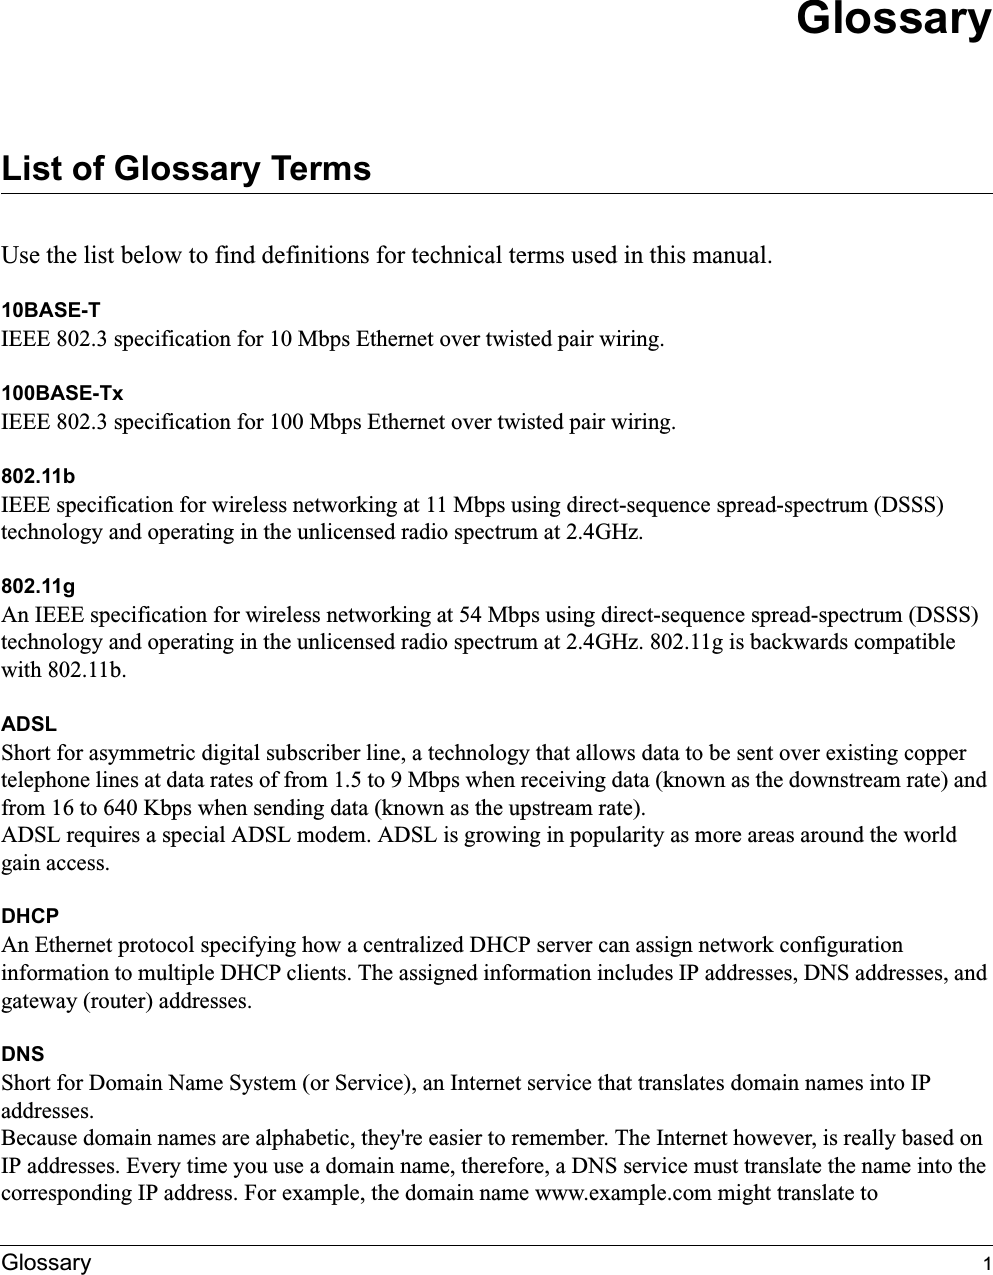 Glossary 1GlossaryList of Glossary TermsUse the list below to find definitions for technical terms used in this manual.10BASE-T IEEE 802.3 specification for 10 Mbps Ethernet over twisted pair wiring.100BASE-Tx IEEE 802.3 specification for 100 Mbps Ethernet over twisted pair wiring.802.11bIEEE specification for wireless networking at 11 Mbps using direct-sequence spread-spectrum (DSSS) technology and operating in the unlicensed radio spectrum at 2.4GHz.802.11gAn IEEE specification for wireless networking at 54 Mbps using direct-sequence spread-spectrum (DSSS) technology and operating in the unlicensed radio spectrum at 2.4GHz. 802.11g is backwards compatible with 802.11b.ADSLShort for asymmetric digital subscriber line, a technology that allows data to be sent over existing copper telephone lines at data rates of from 1.5 to 9 Mbps when receiving data (known as the downstream rate) and from 16 to 640 Kbps when sending data (known as the upstream rate). ADSL requires a special ADSL modem. ADSL is growing in popularity as more areas around the world gain access. DHCPAn Ethernet protocol specifying how a centralized DHCP server can assign network configuration information to multiple DHCP clients. The assigned information includes IP addresses, DNS addresses, and gateway (router) addresses.DNSShort for Domain Name System (or Service), an Internet service that translates domain names into IP addresses.Because domain names are alphabetic, they&apos;re easier to remember. The Internet however, is really based on IP addresses. Every time you use a domain name, therefore, a DNS service must translate the name into the corresponding IP address. For example, the domain name www.example.com might translate to 